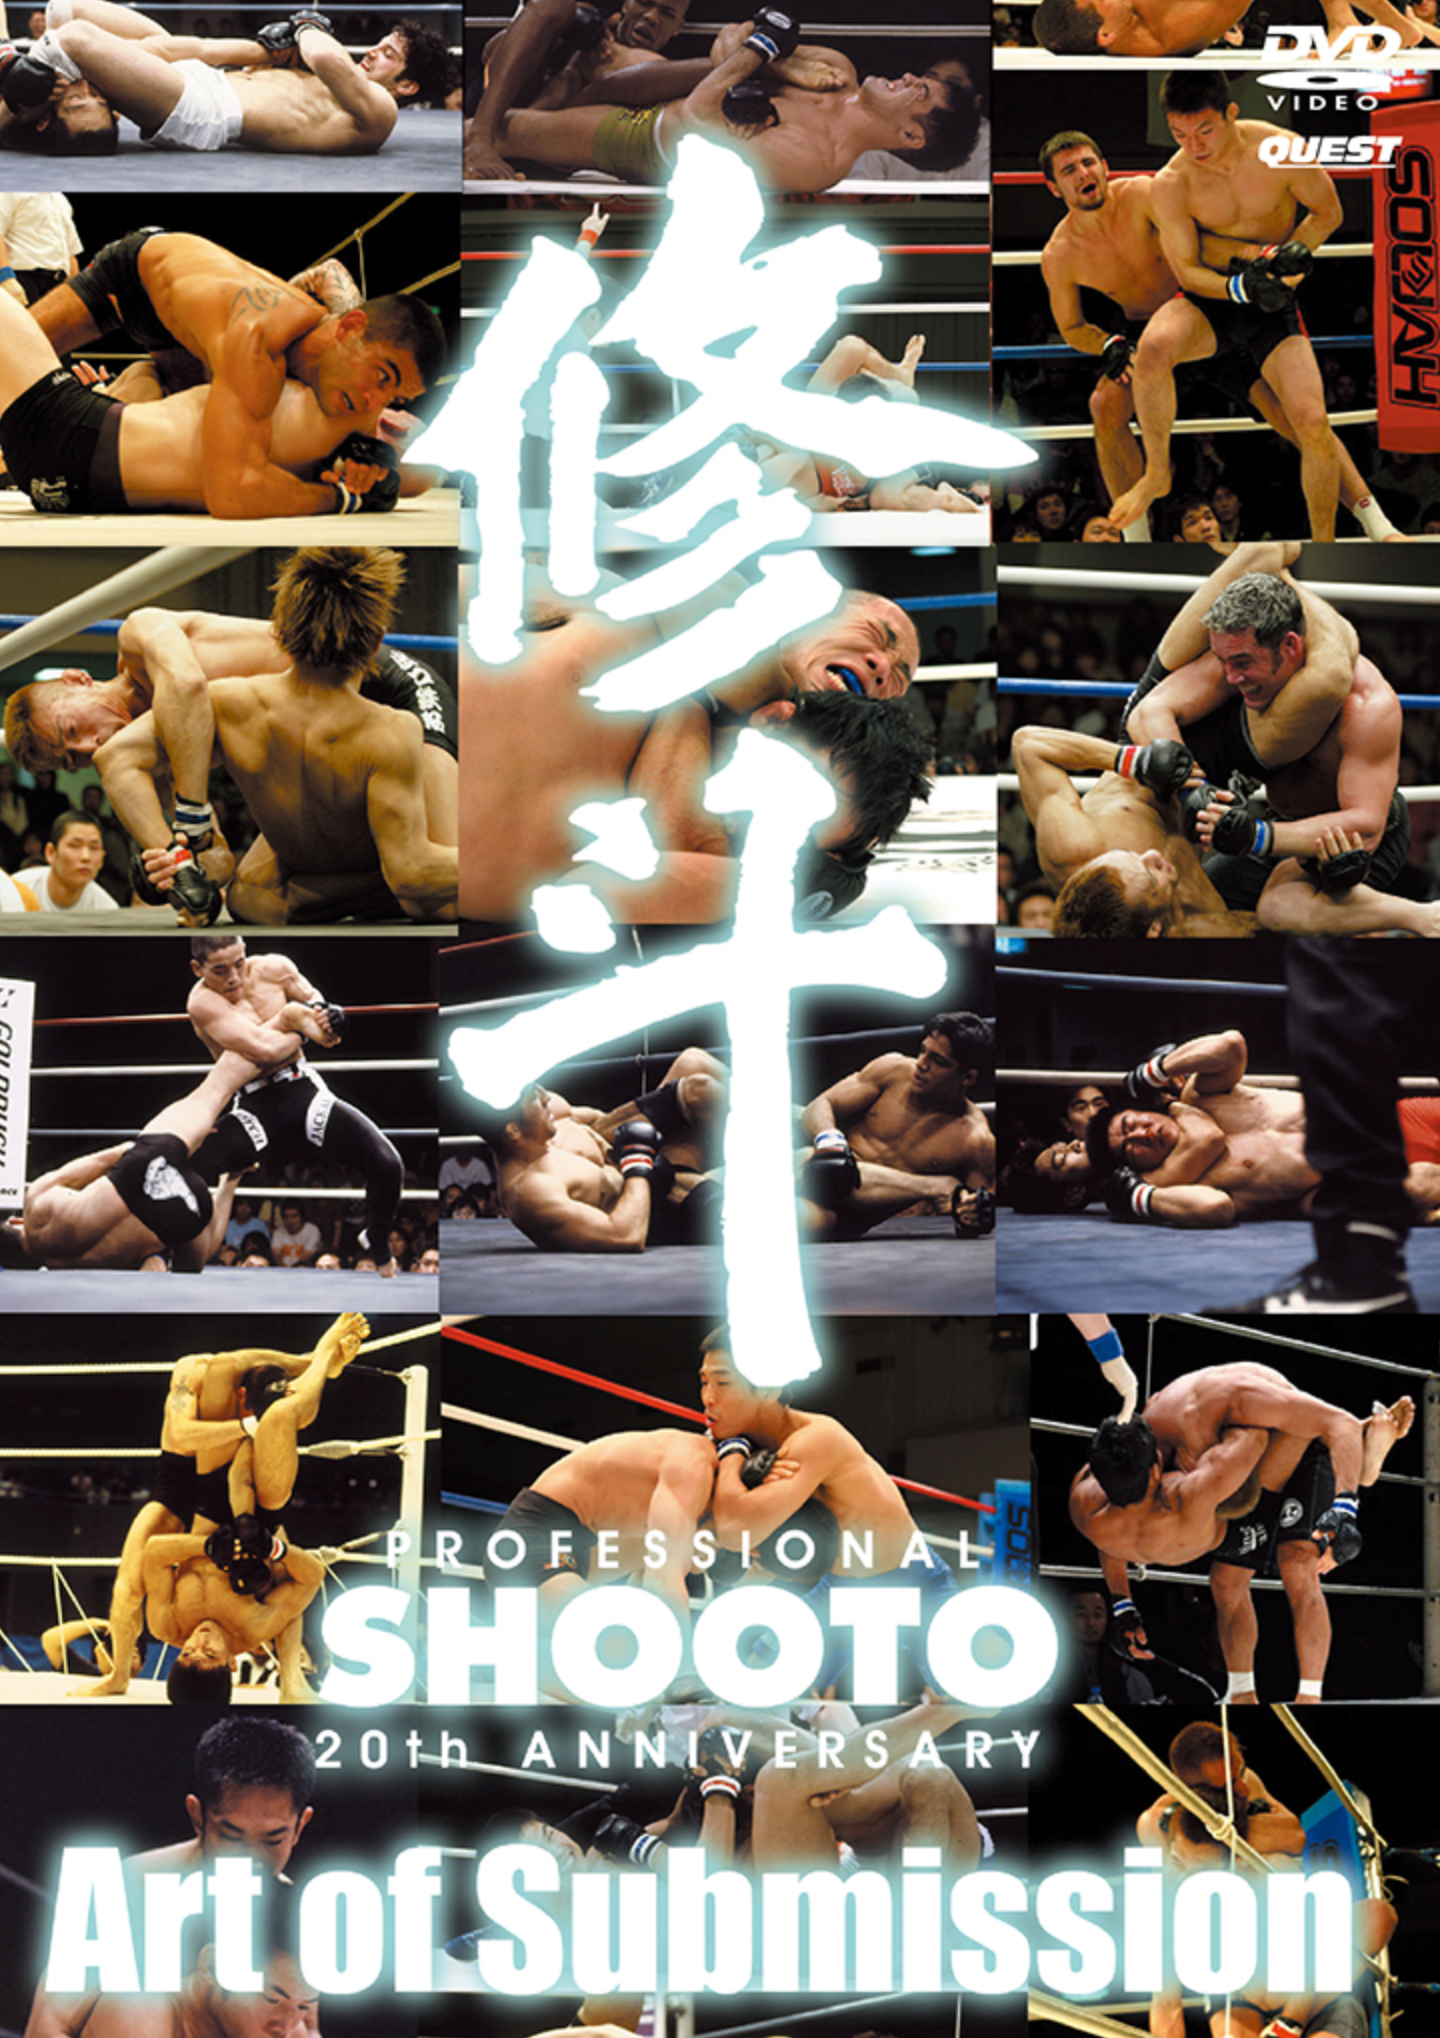 Shooto 20th Anniversary: Art of Submission DVD - Budovideos Inc